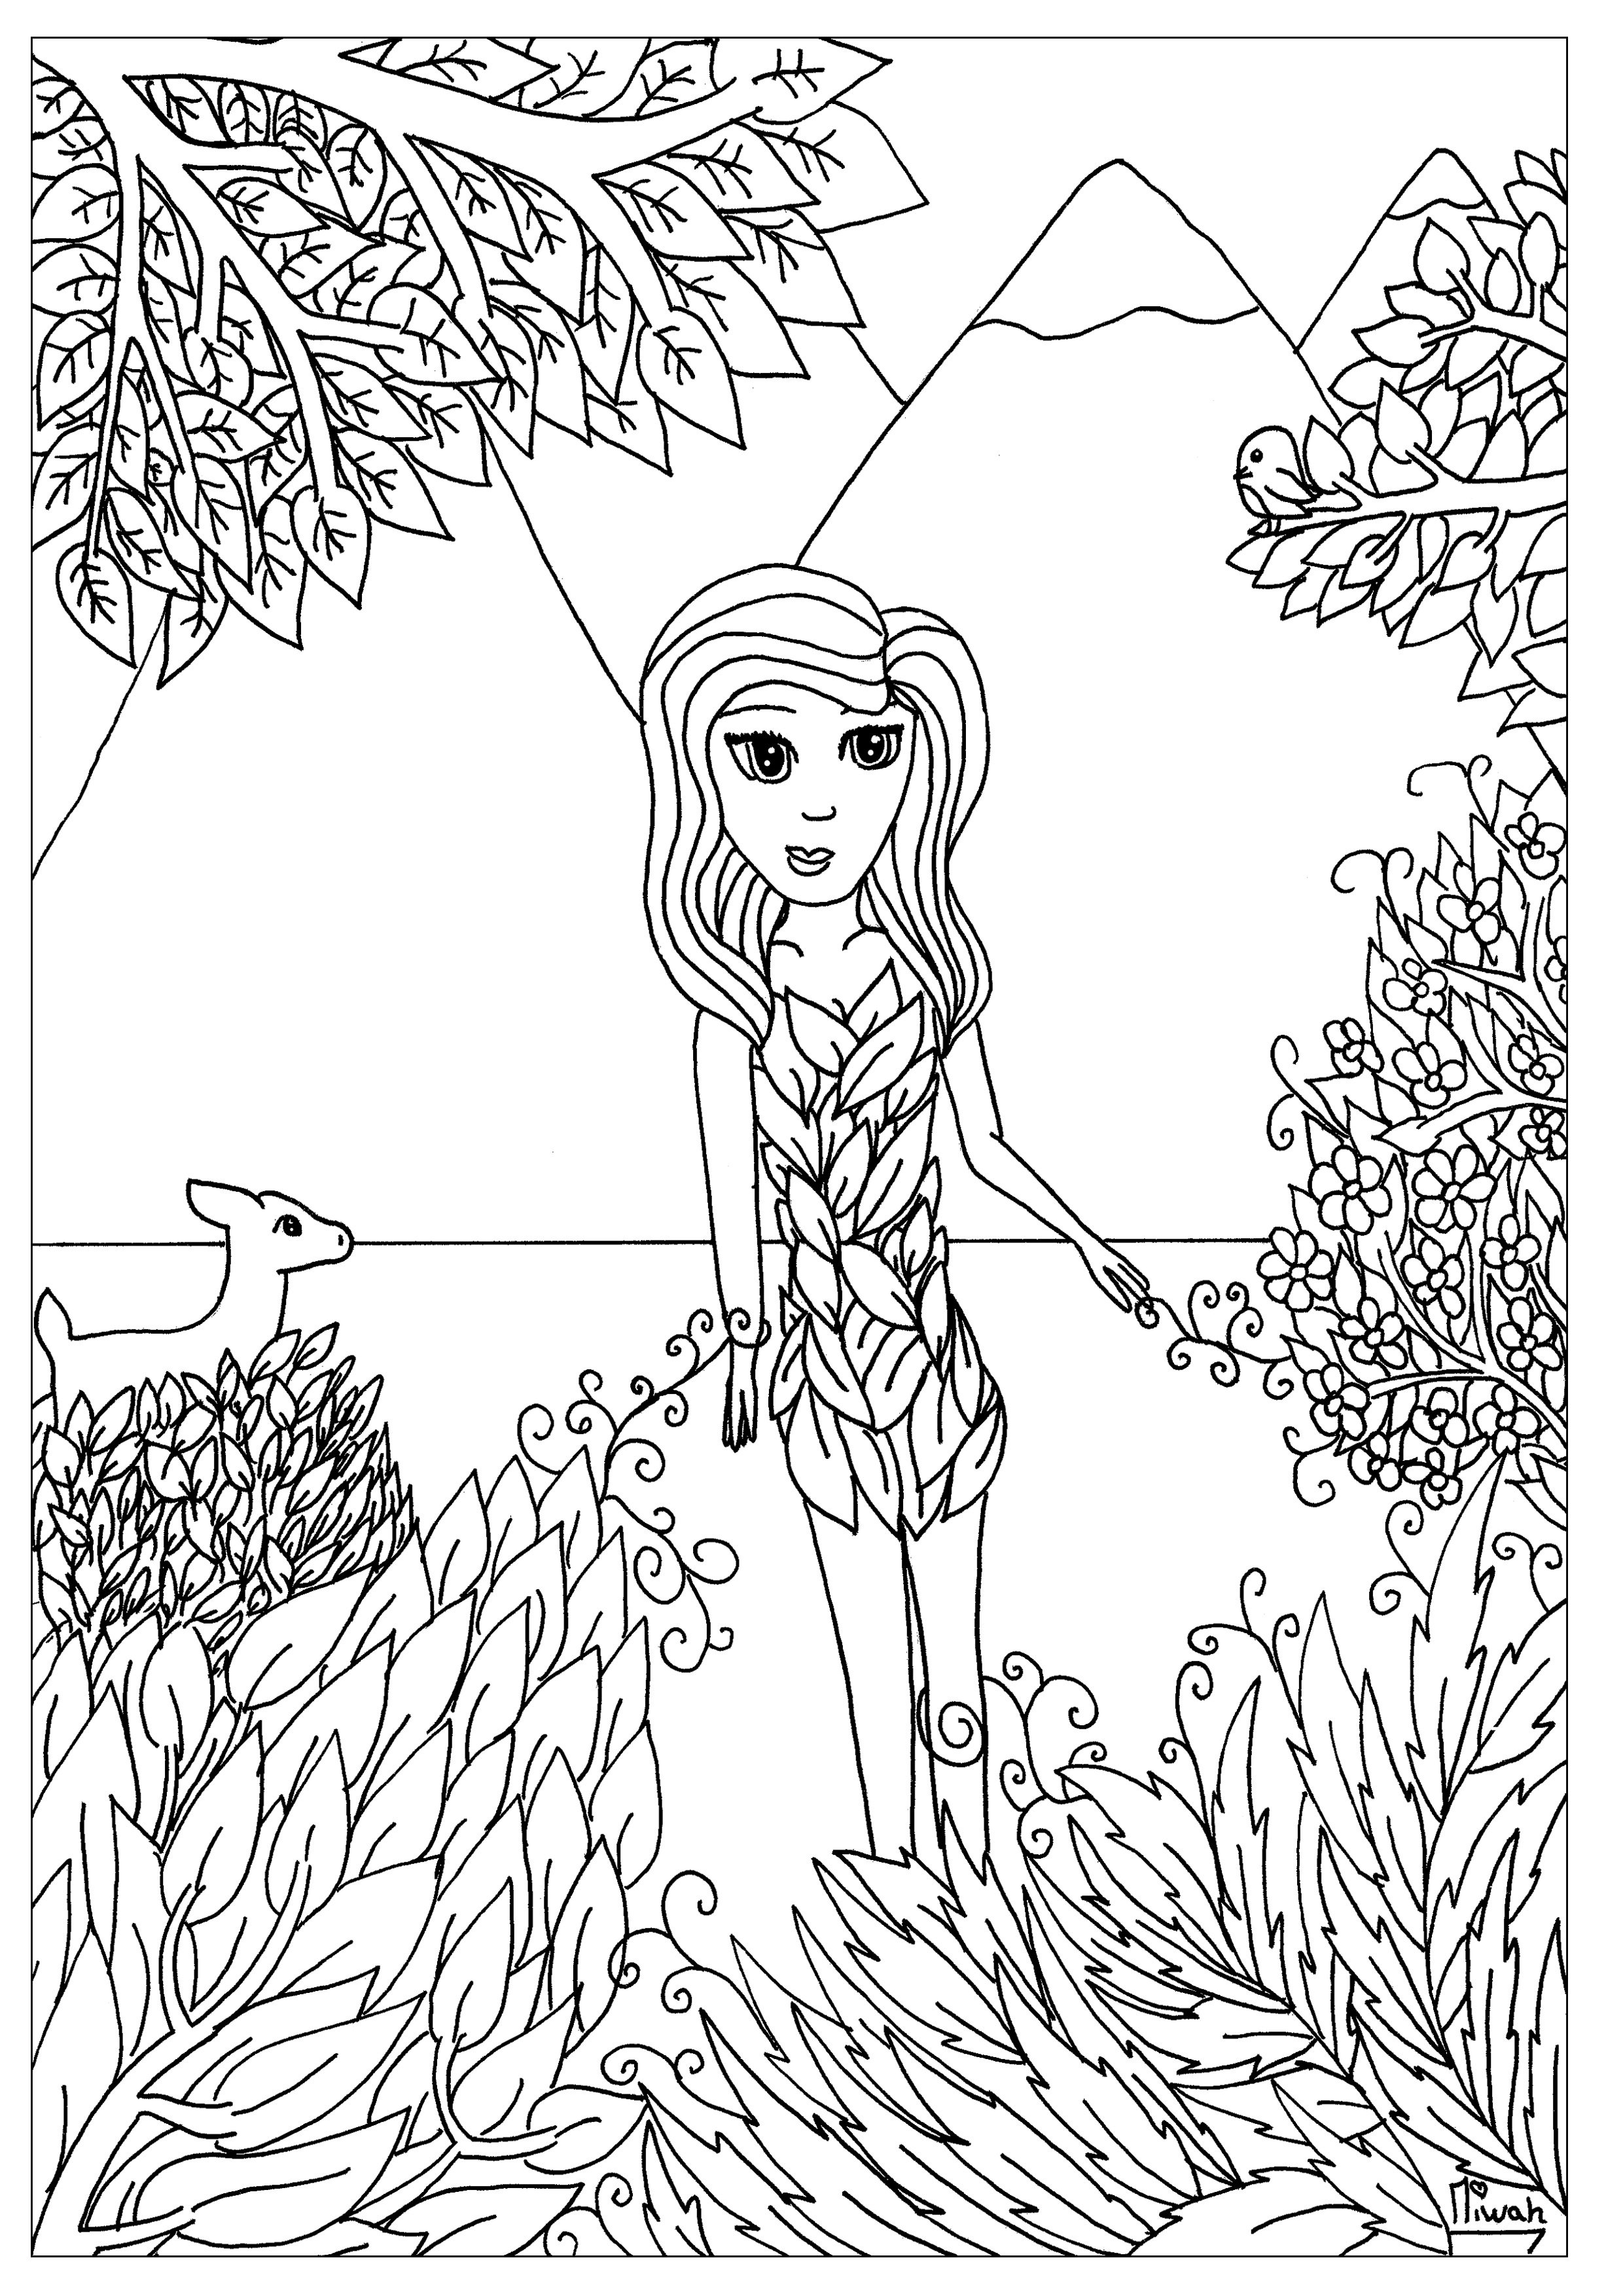 Download Flower girl - Anti stress Adult Coloring Pages